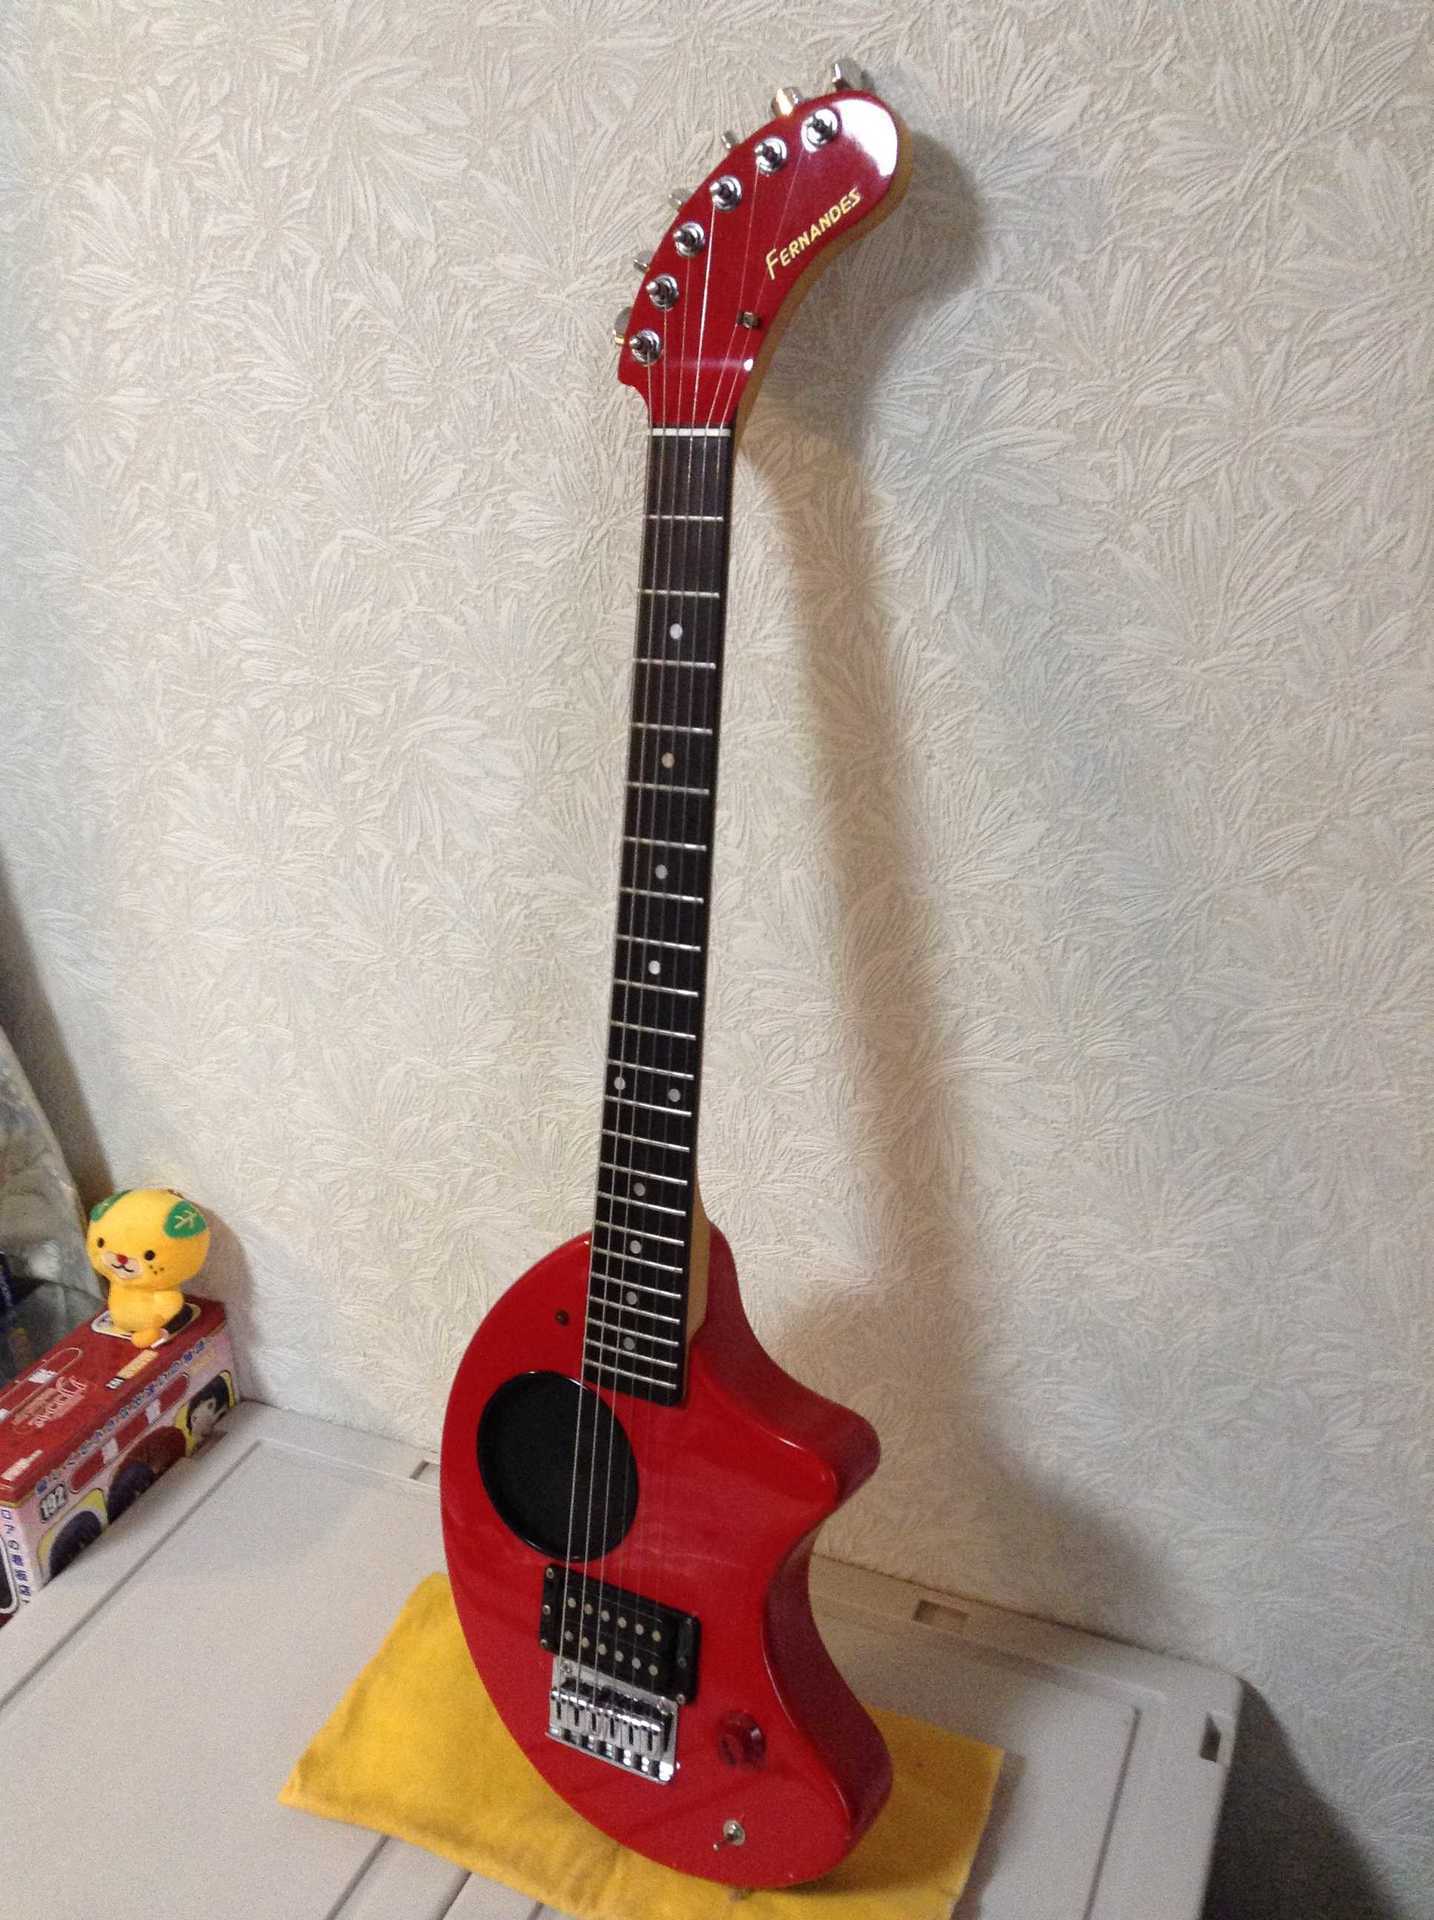 FERNANDES Zo-3 RED 1992or93？: 昔に比べりゃ 金も入るし・・・・